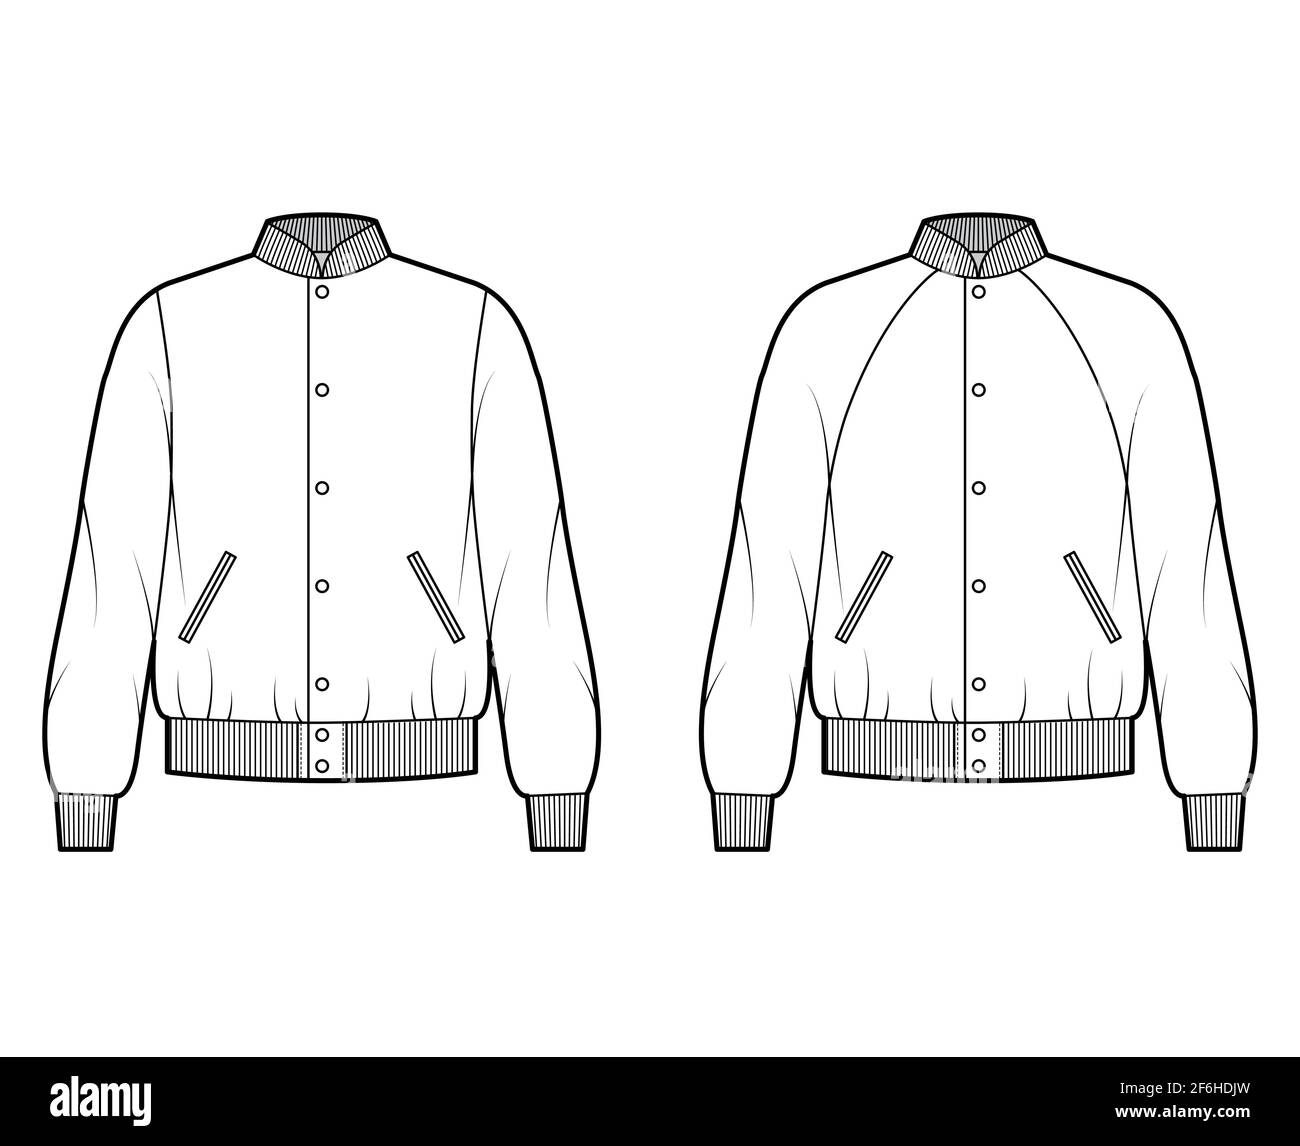 Set of Bomber jackets technical fashion illustration with Rib baseball collar, cuffs, oversized, long raglan sleeves, flap pockets. Flat coat template front, white color. Women, men, unisex top CAD Stock Vector